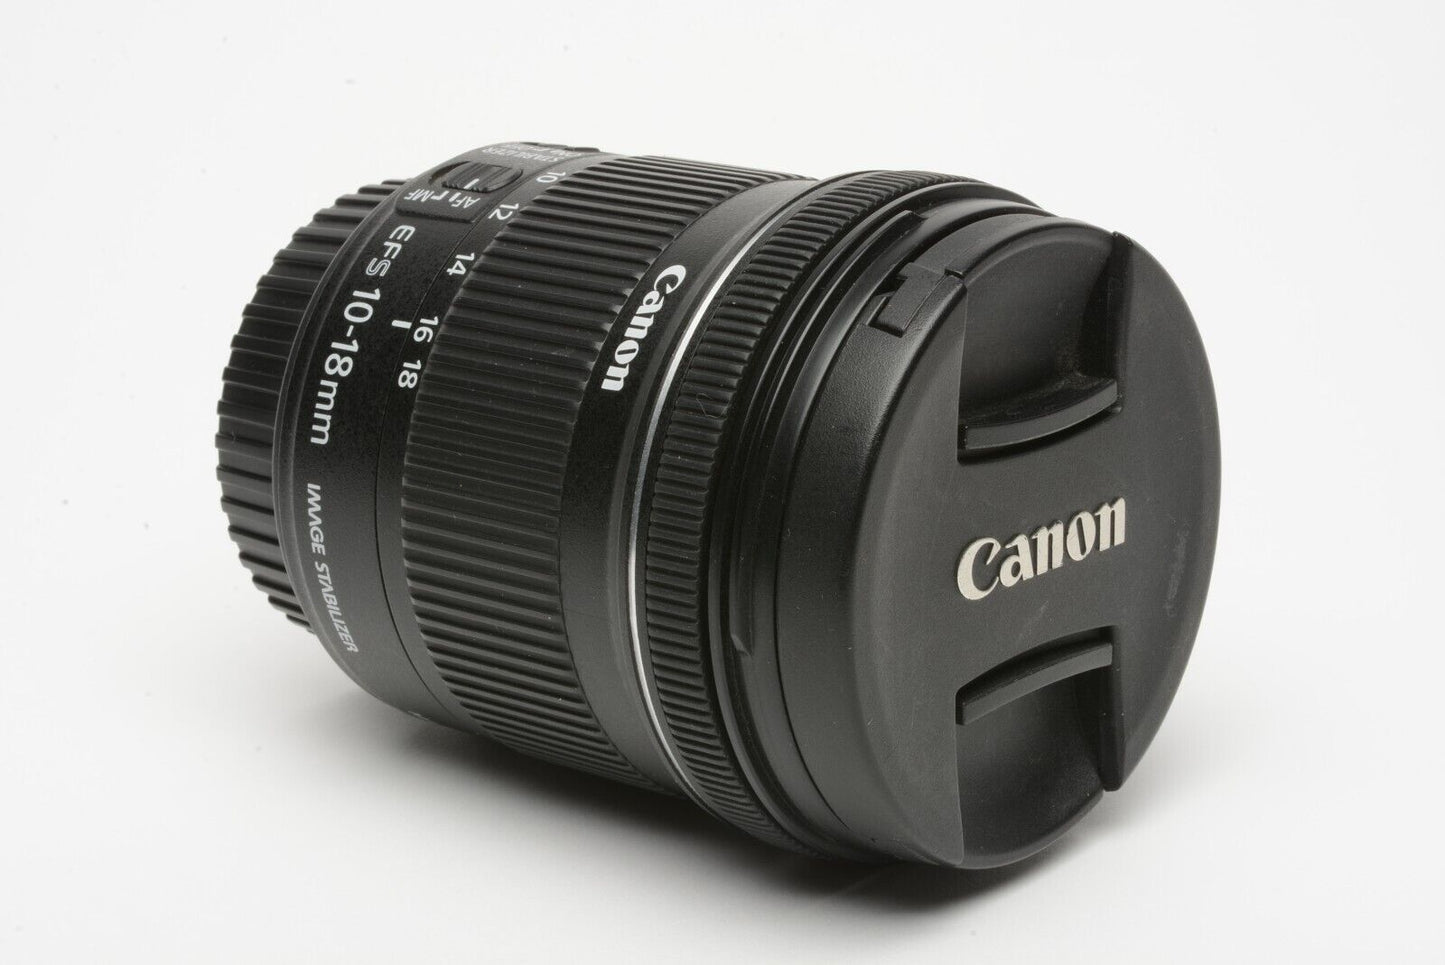 MINT- CANON EF-S 10-18mm f4.5-5.6 IS STM ZOOM, CAPS, VERY CLEAN, VERSATILE